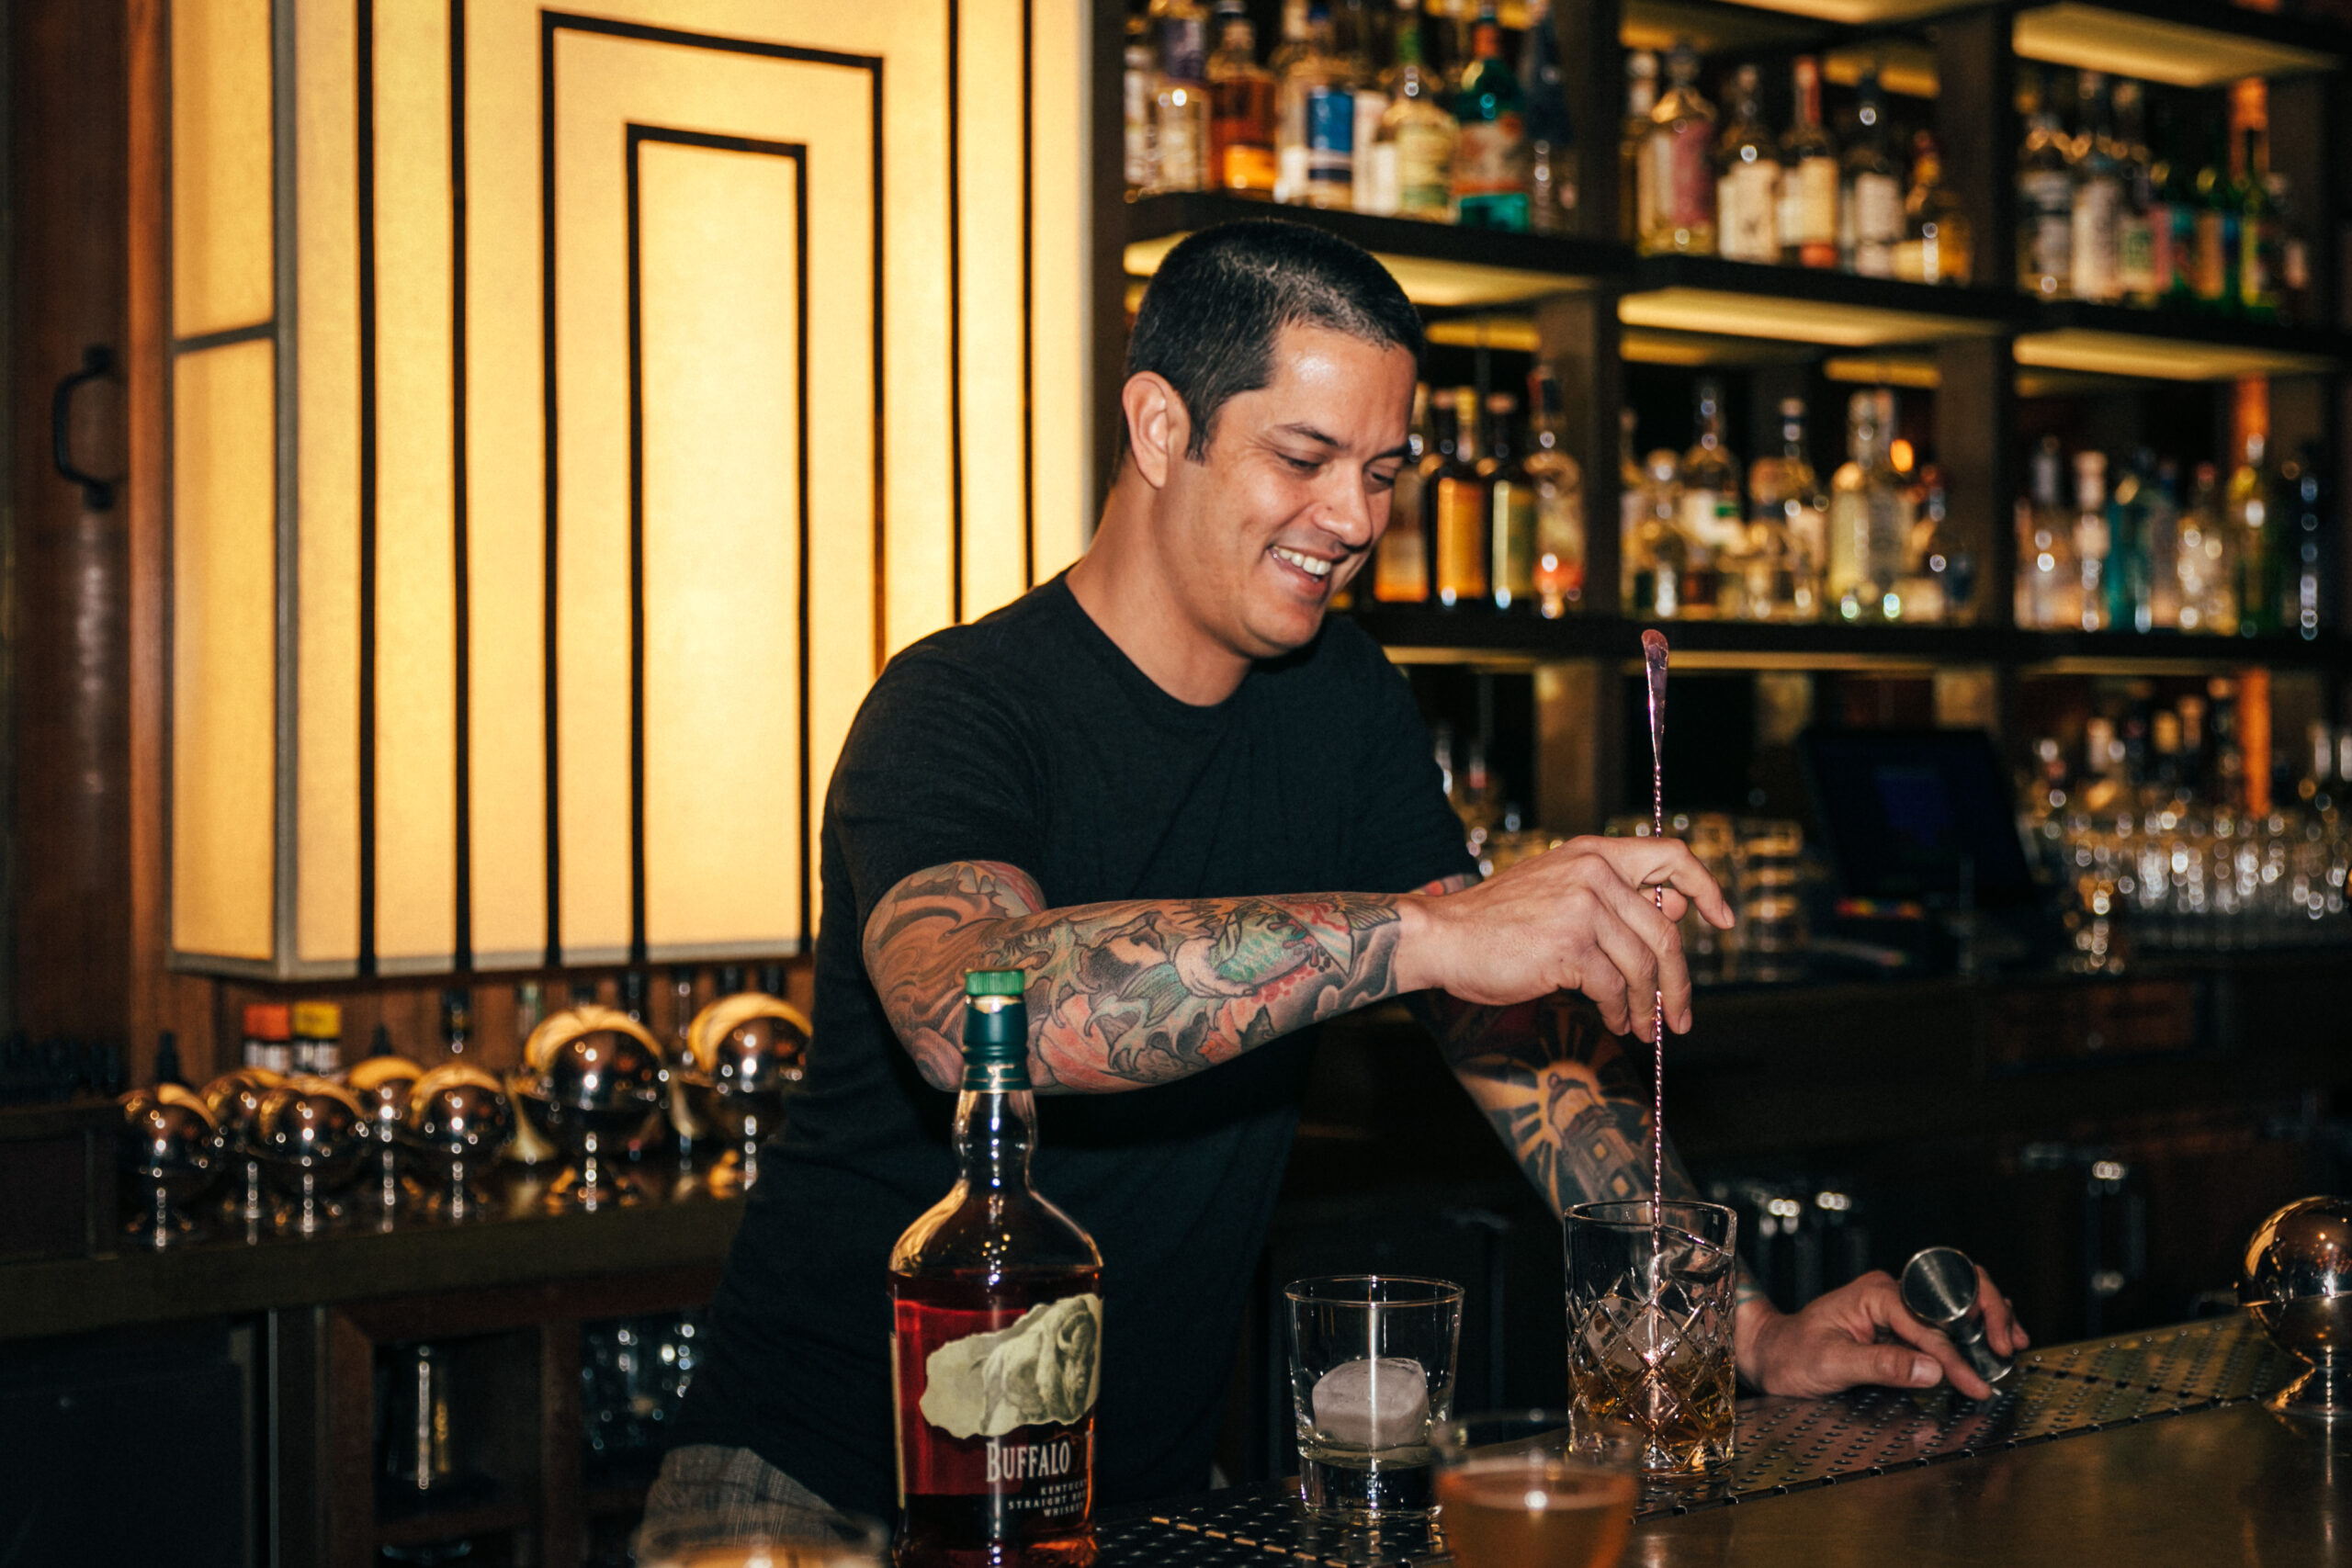 New Midnight Rambler general manager, Gabe Sanchez, looks happy to be behind the bar again.